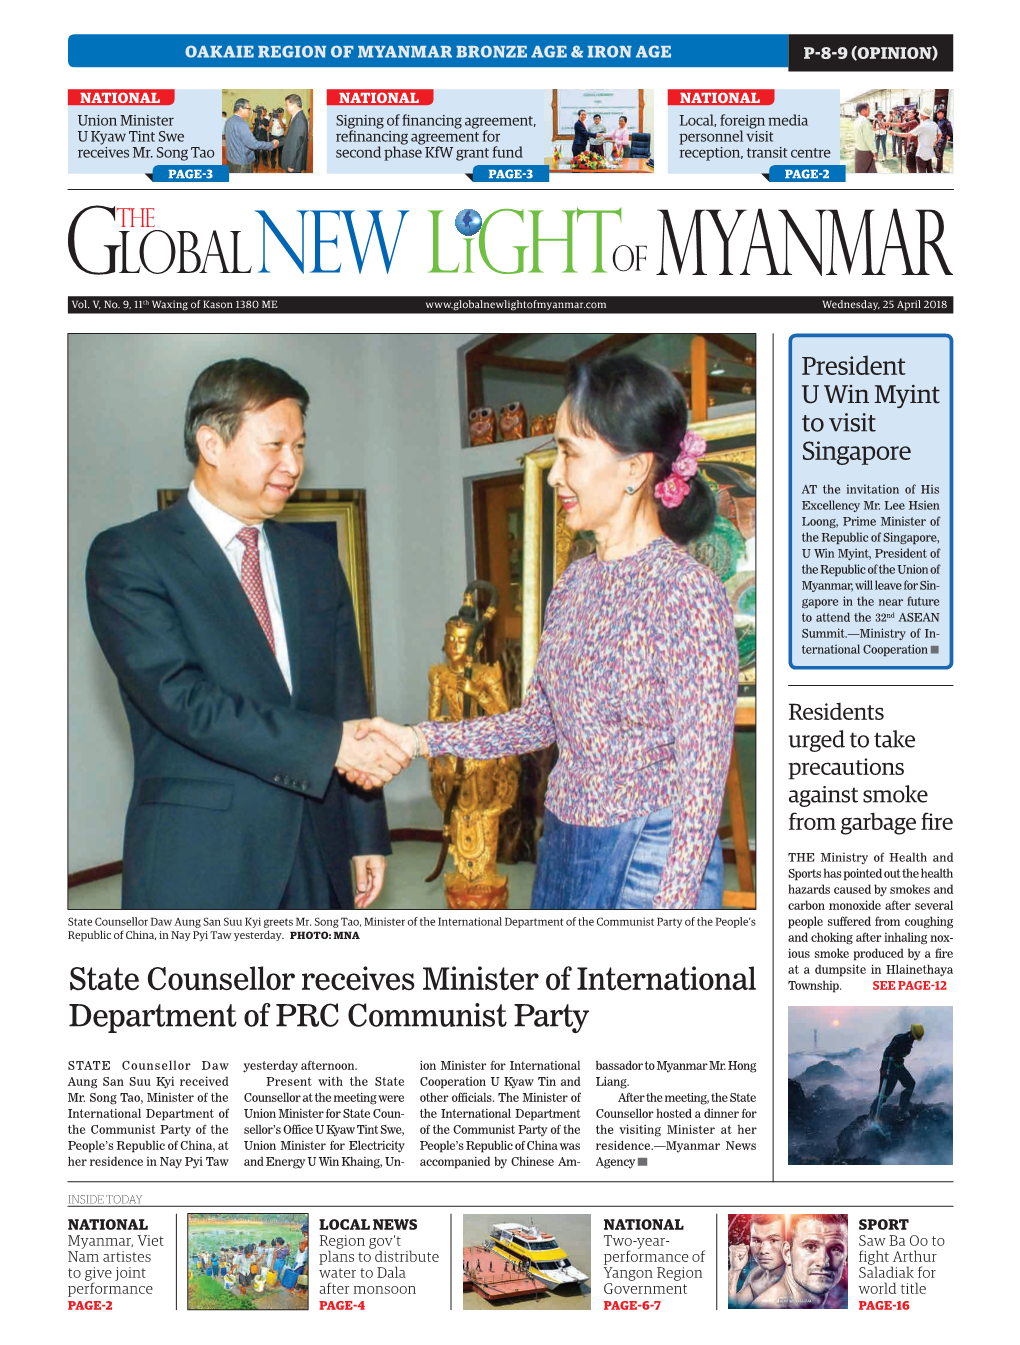 State Counsellor Receives Minister of International Department of PRC